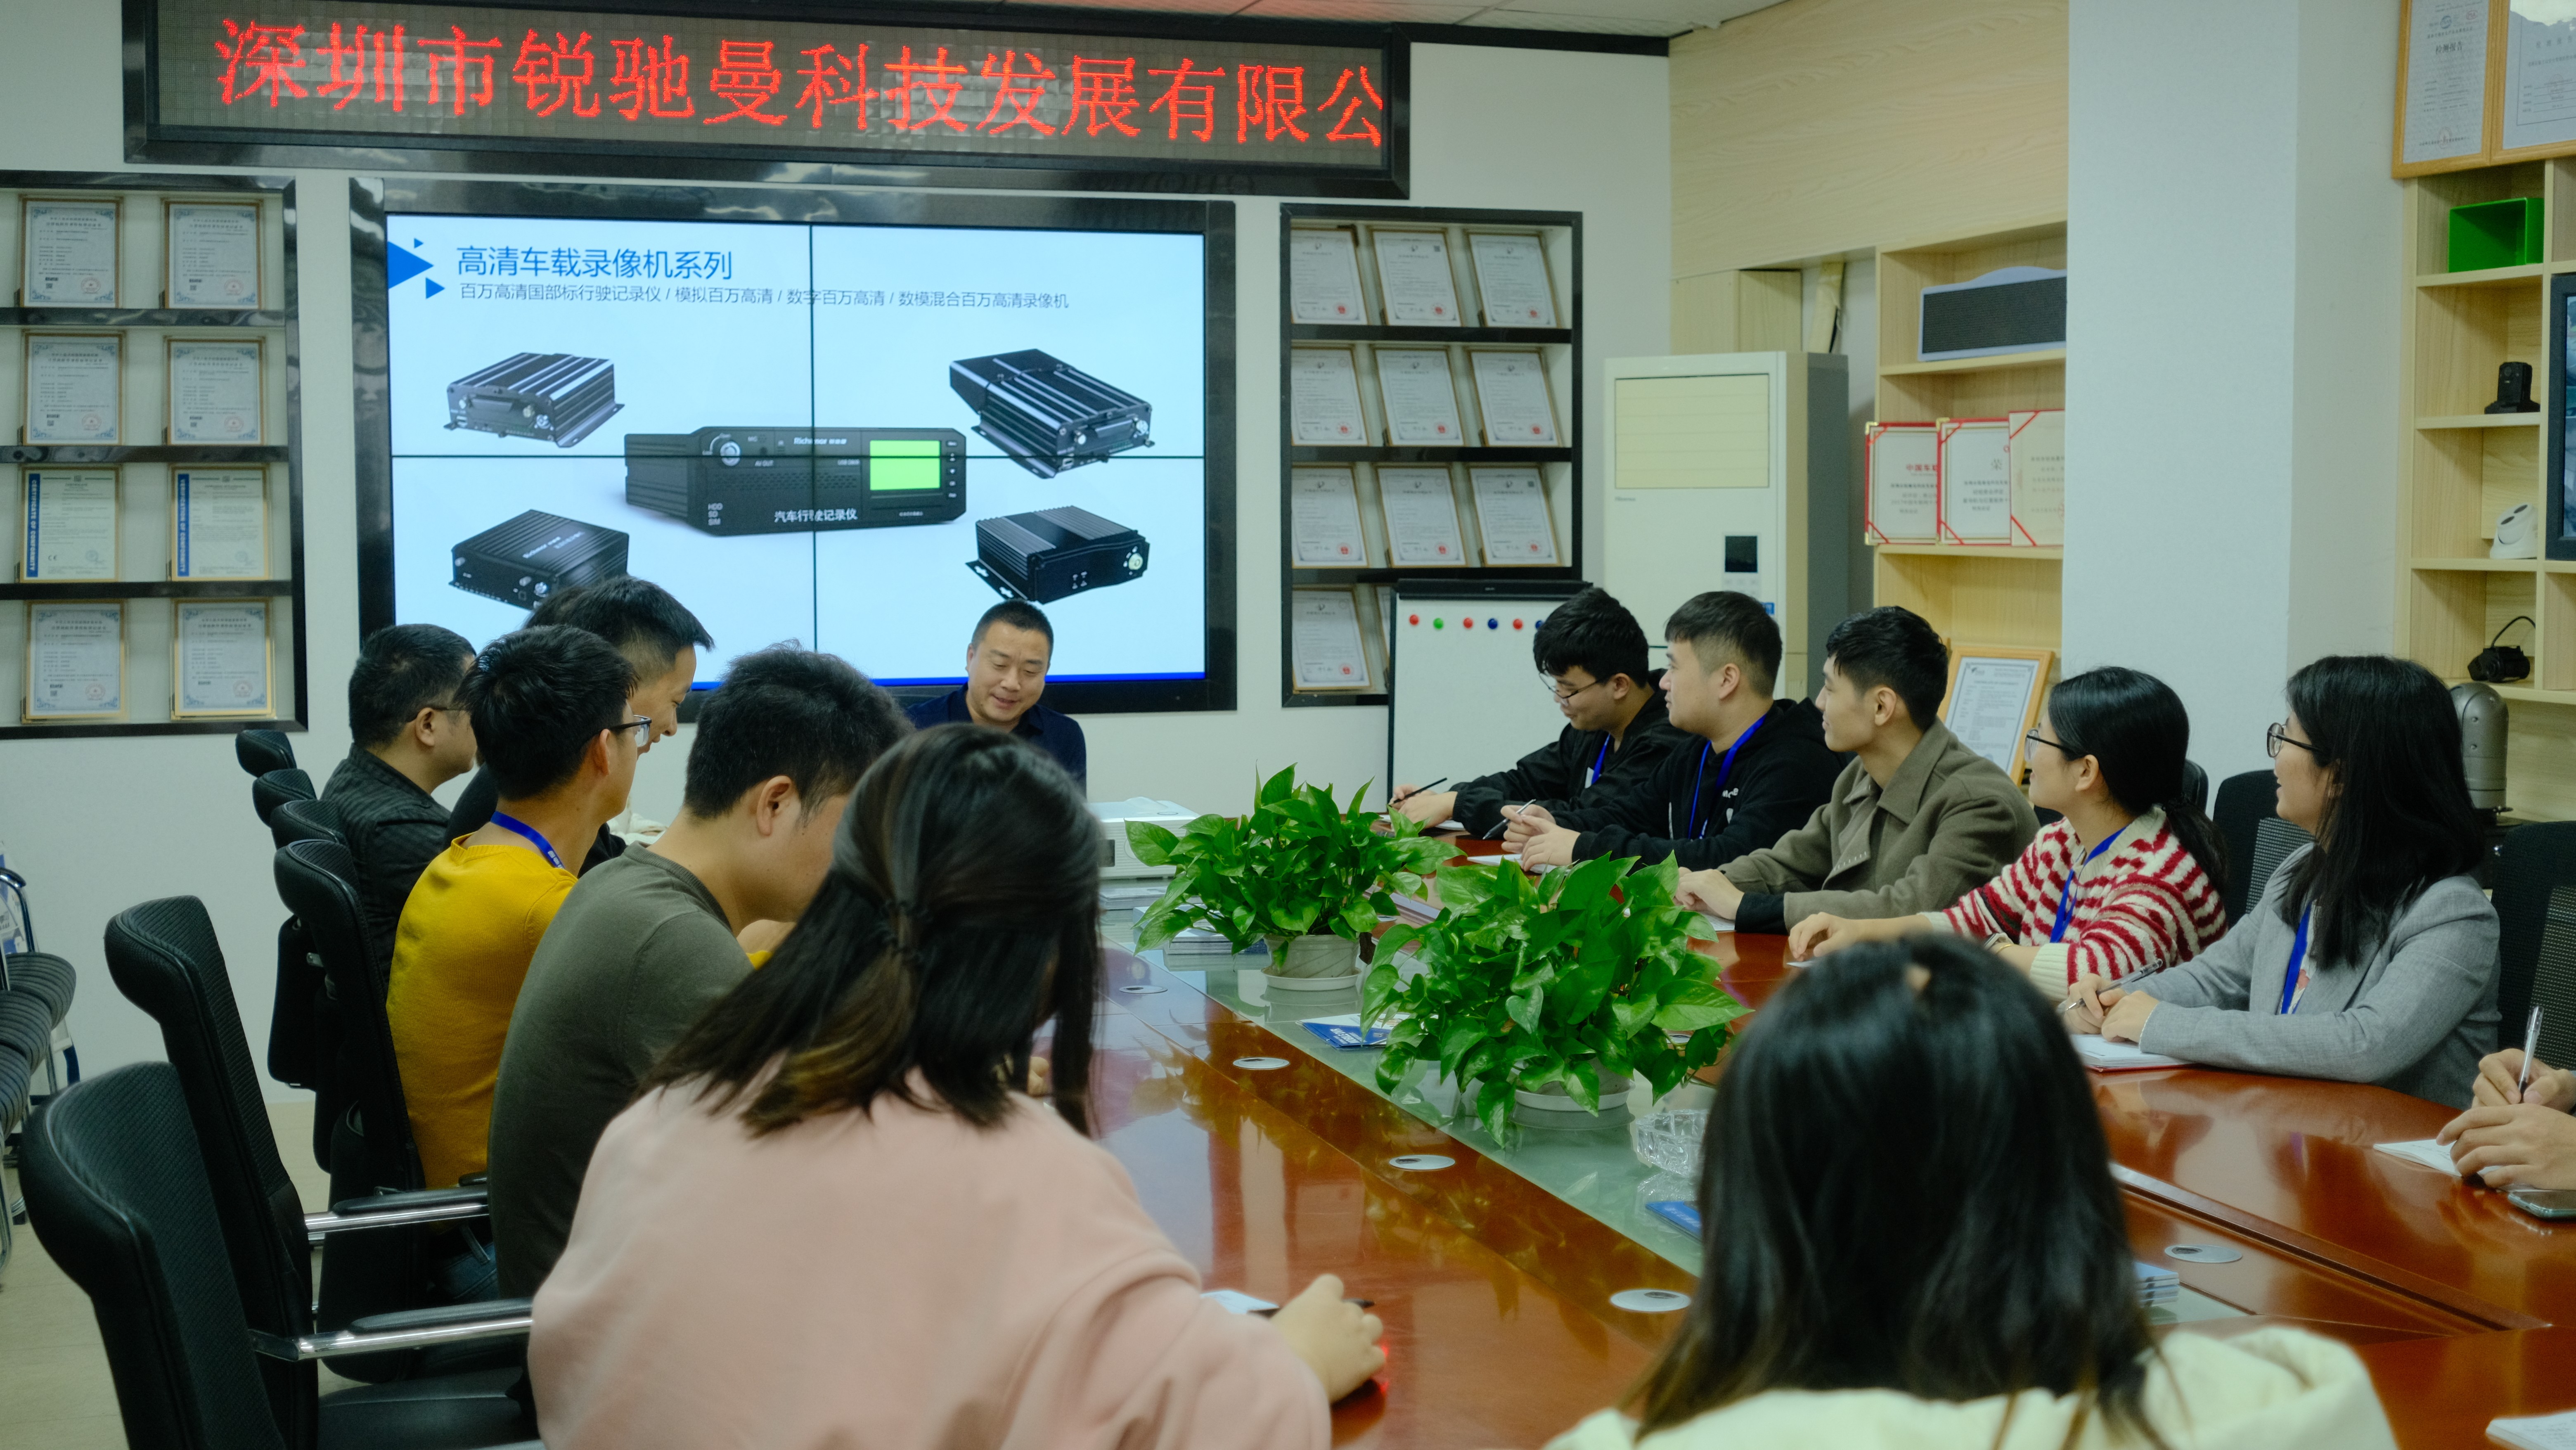 Shenzhen Richmor Technology Development Co., Ltd. It  is a high-tech enterprise specialized in development, production and sales, mainly provides video security solutions and produces mobile video surveillance products such as MDVR